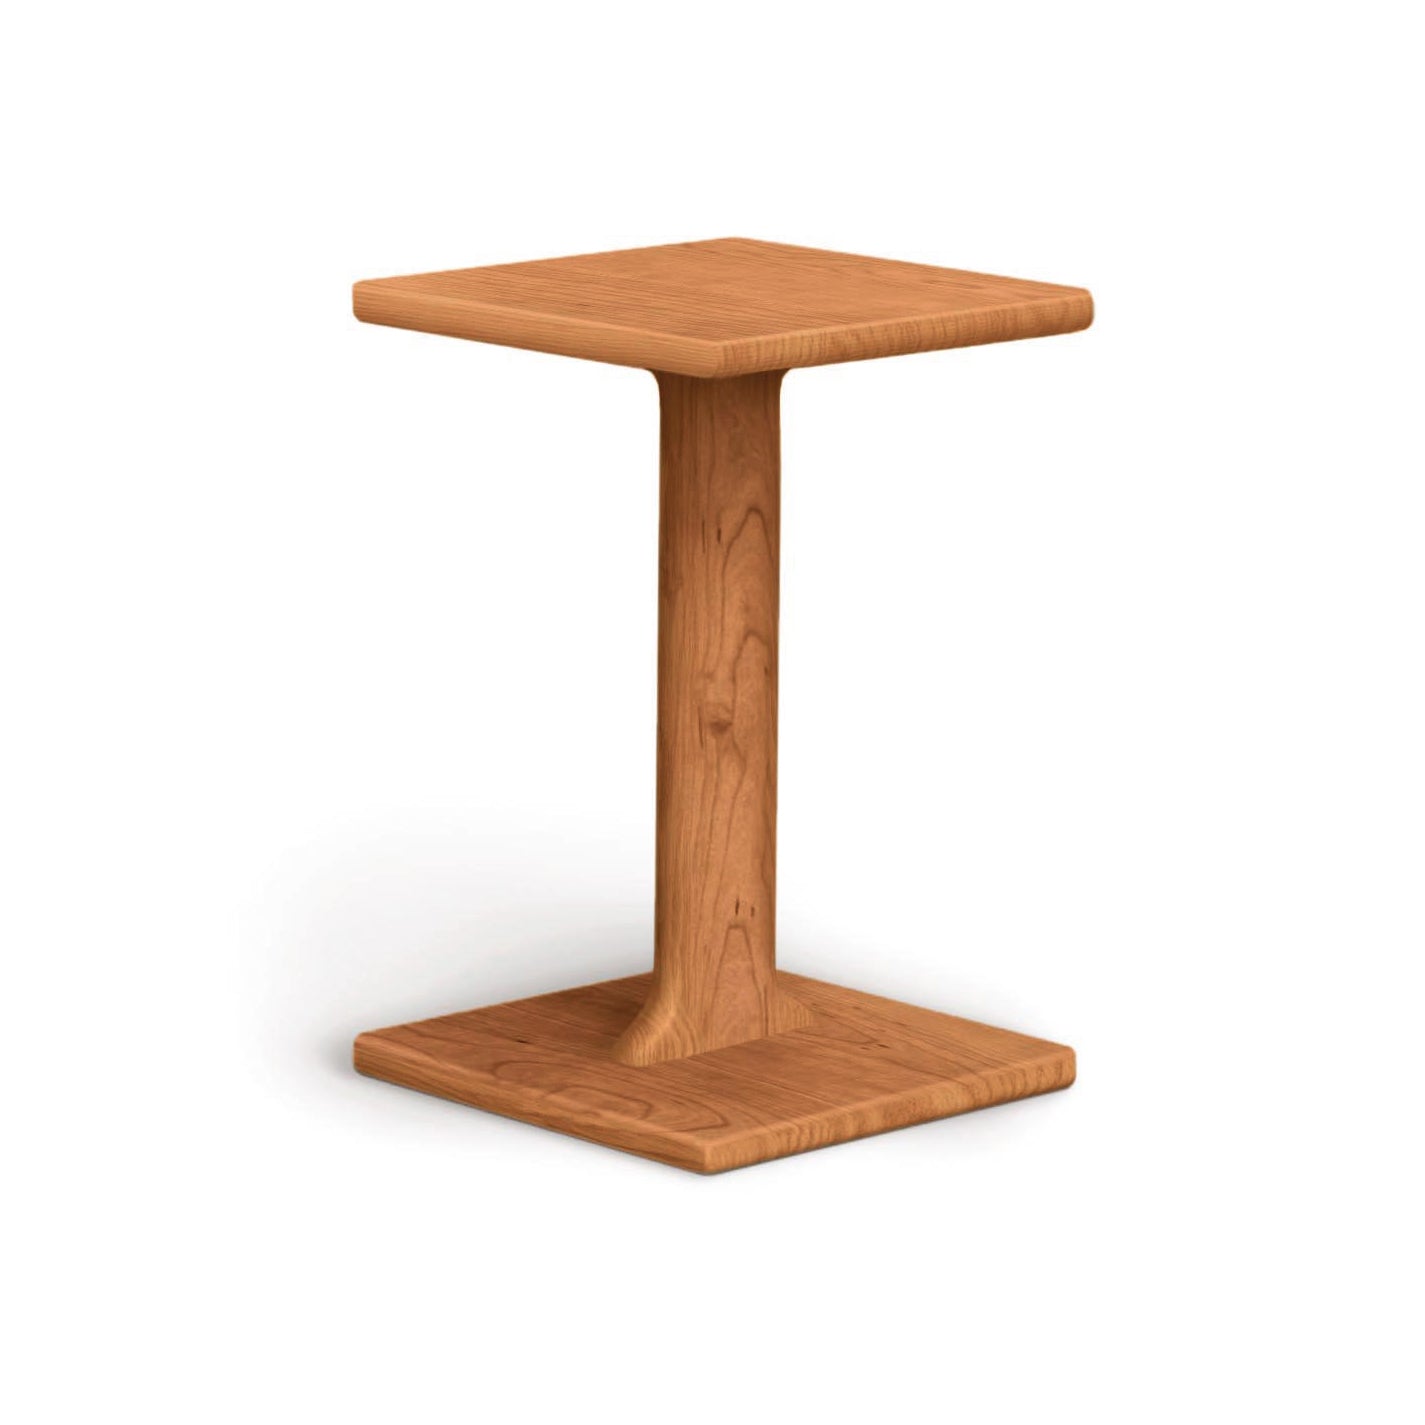 A Sierra Chair Table made by Copeland Furniture, with a square top and base, isolated on a white background.